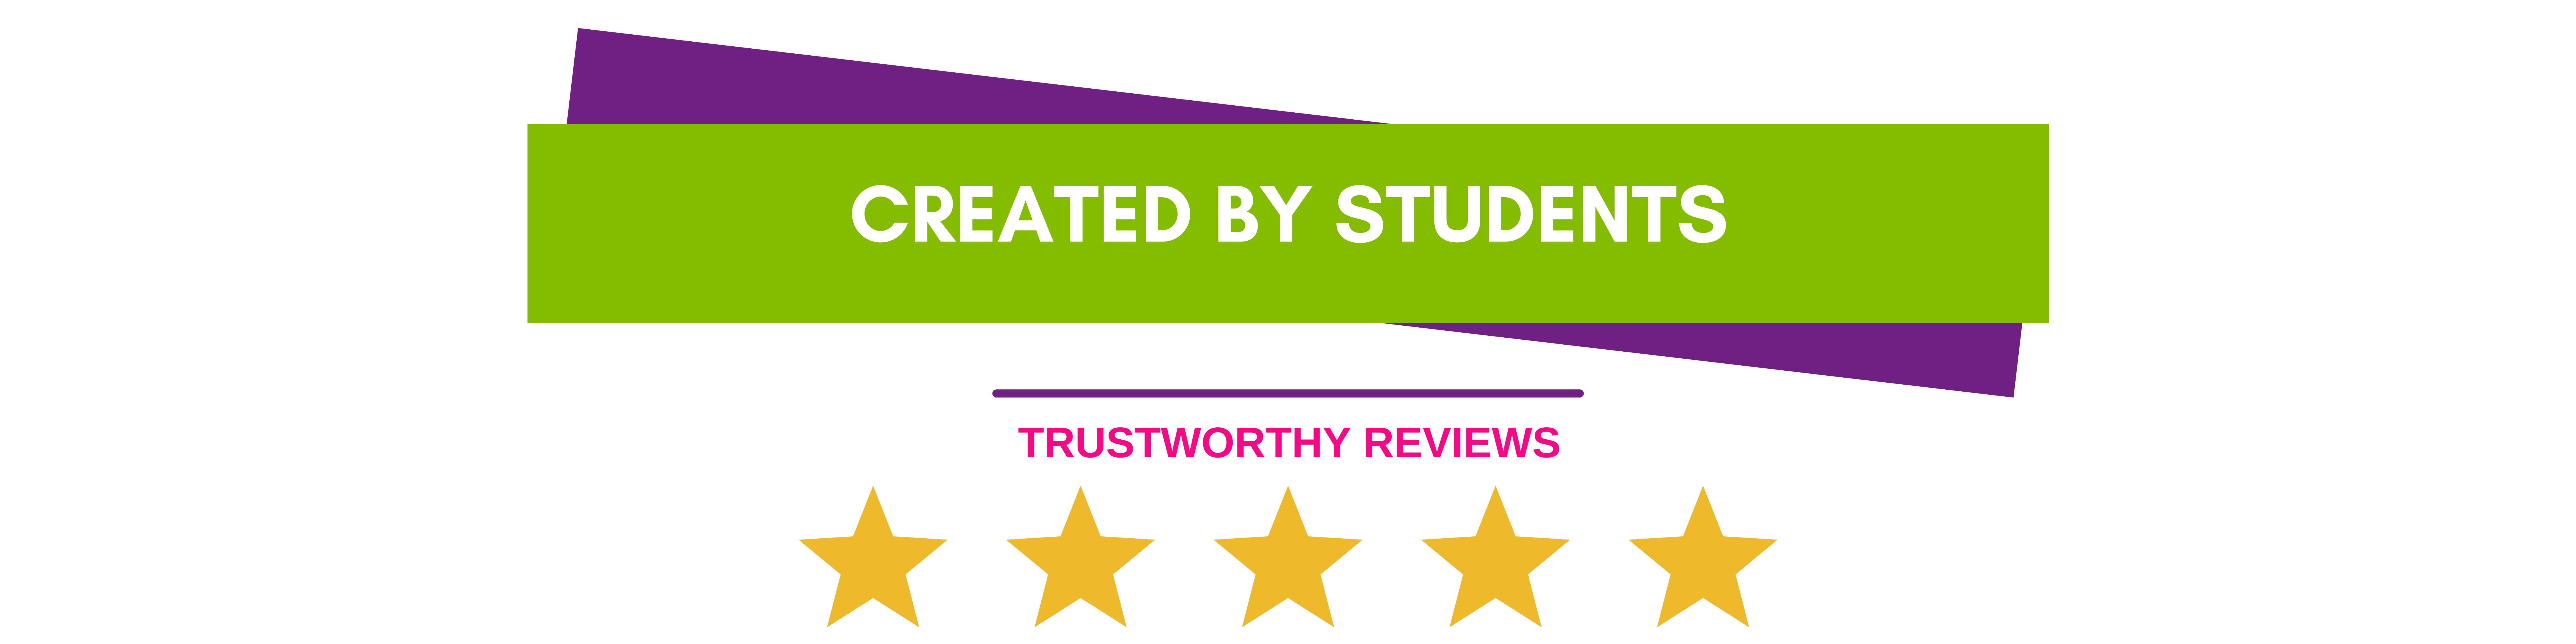 Dream-Team-Team-Stand-Up-Loyal-Students-Trustworthy-Reviews-Assuaged